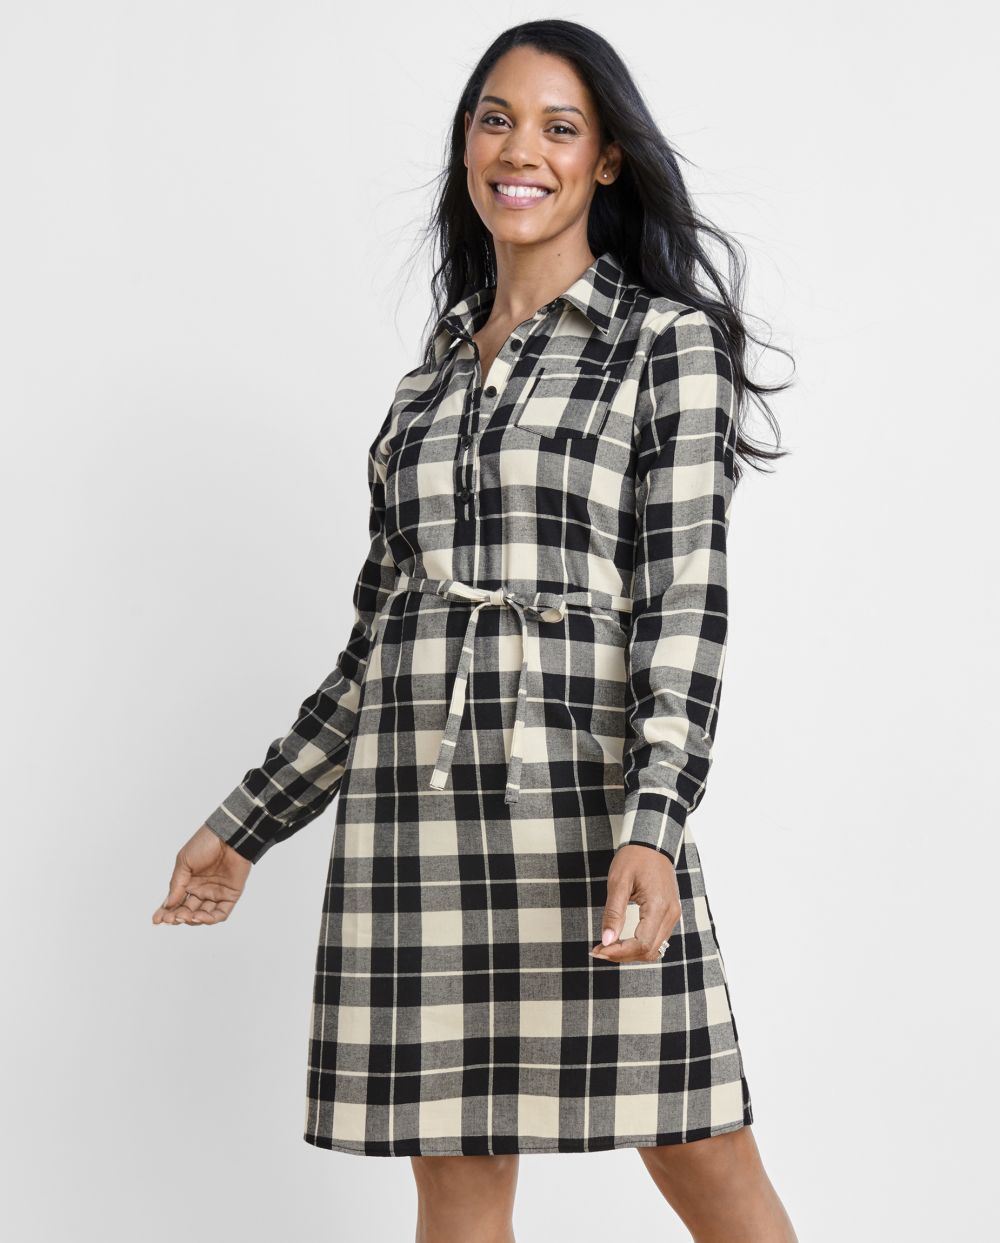 Tie Waist Waistline Long Sleeves Collared Above the Knee Self Tie Belted Pocketed Plaid Print Shirt Dress